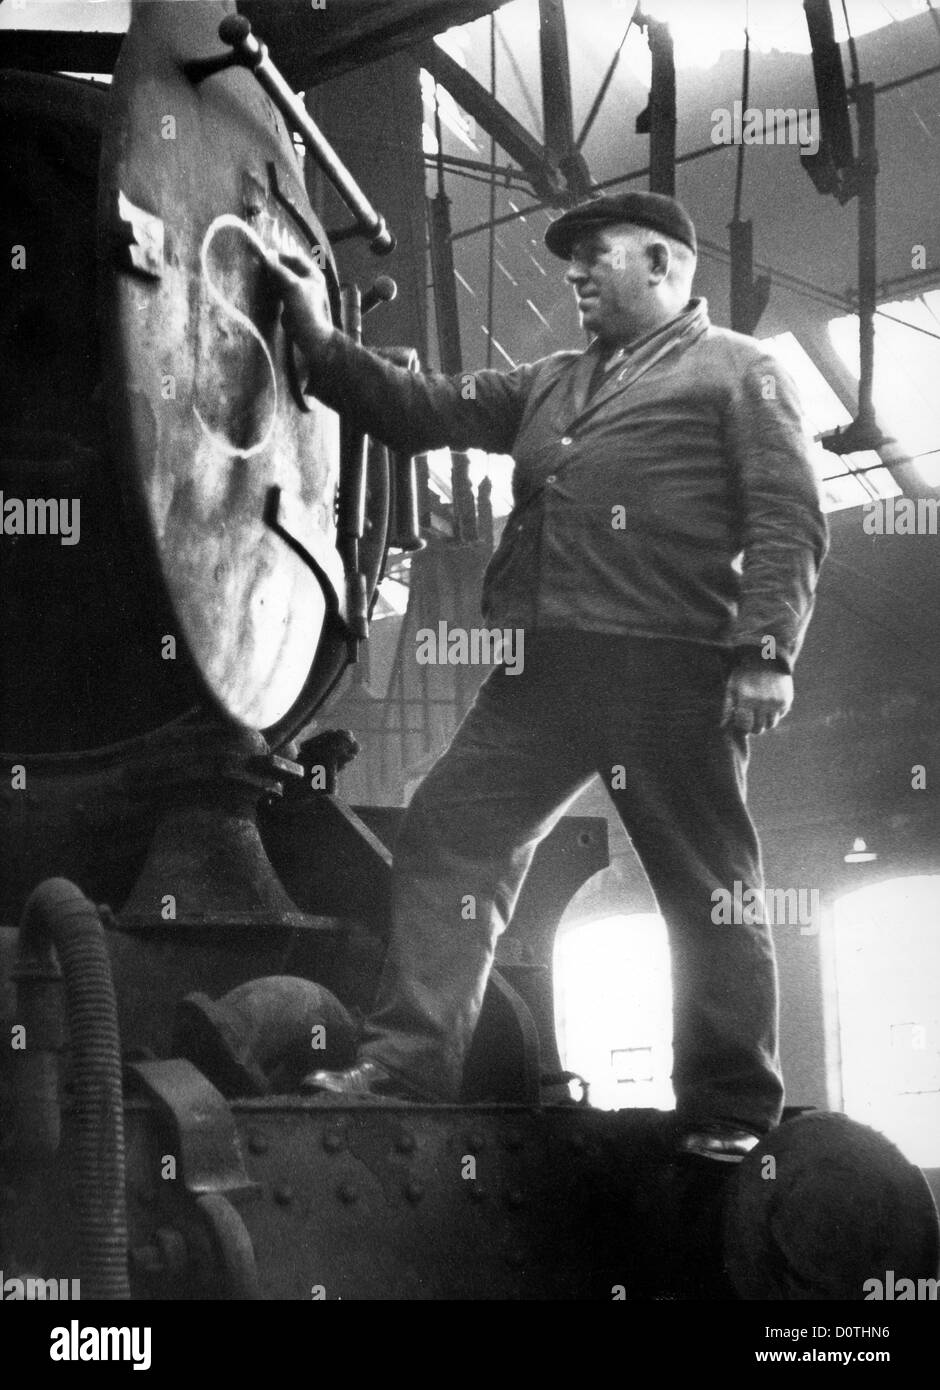 Railway worker writes S for Scrap on a Steam Locomotive at Oxley Sheds Wolverhampton 1967 Britain 1960s PICTURE BY DAVID BAGNALL Stock Photo